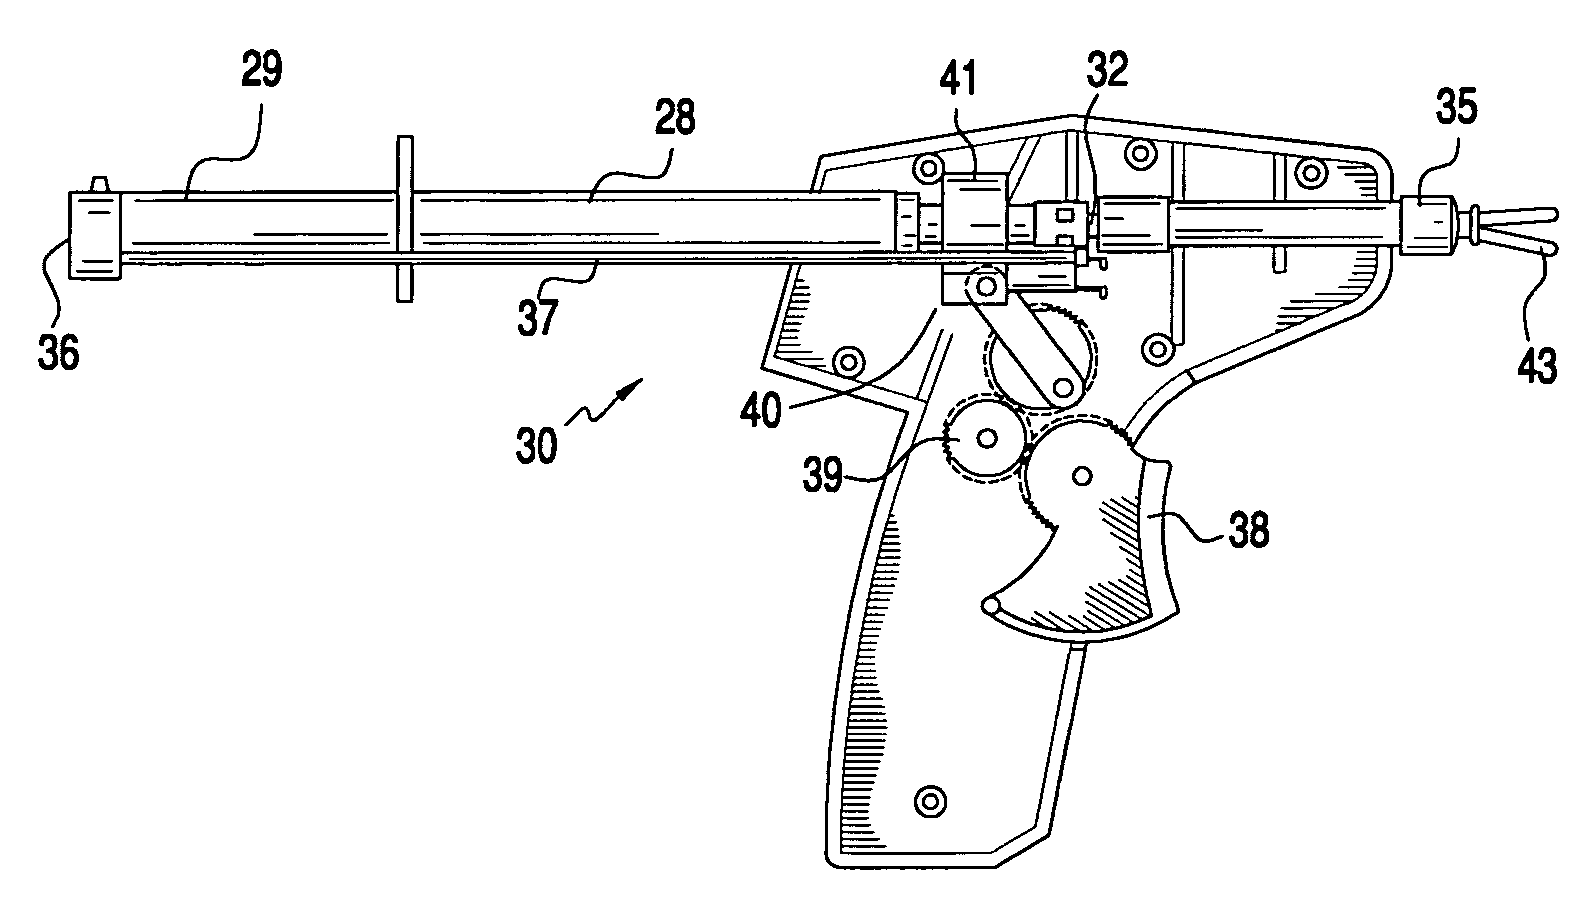 Apparatus and methods for treating tissue using passive injection systems